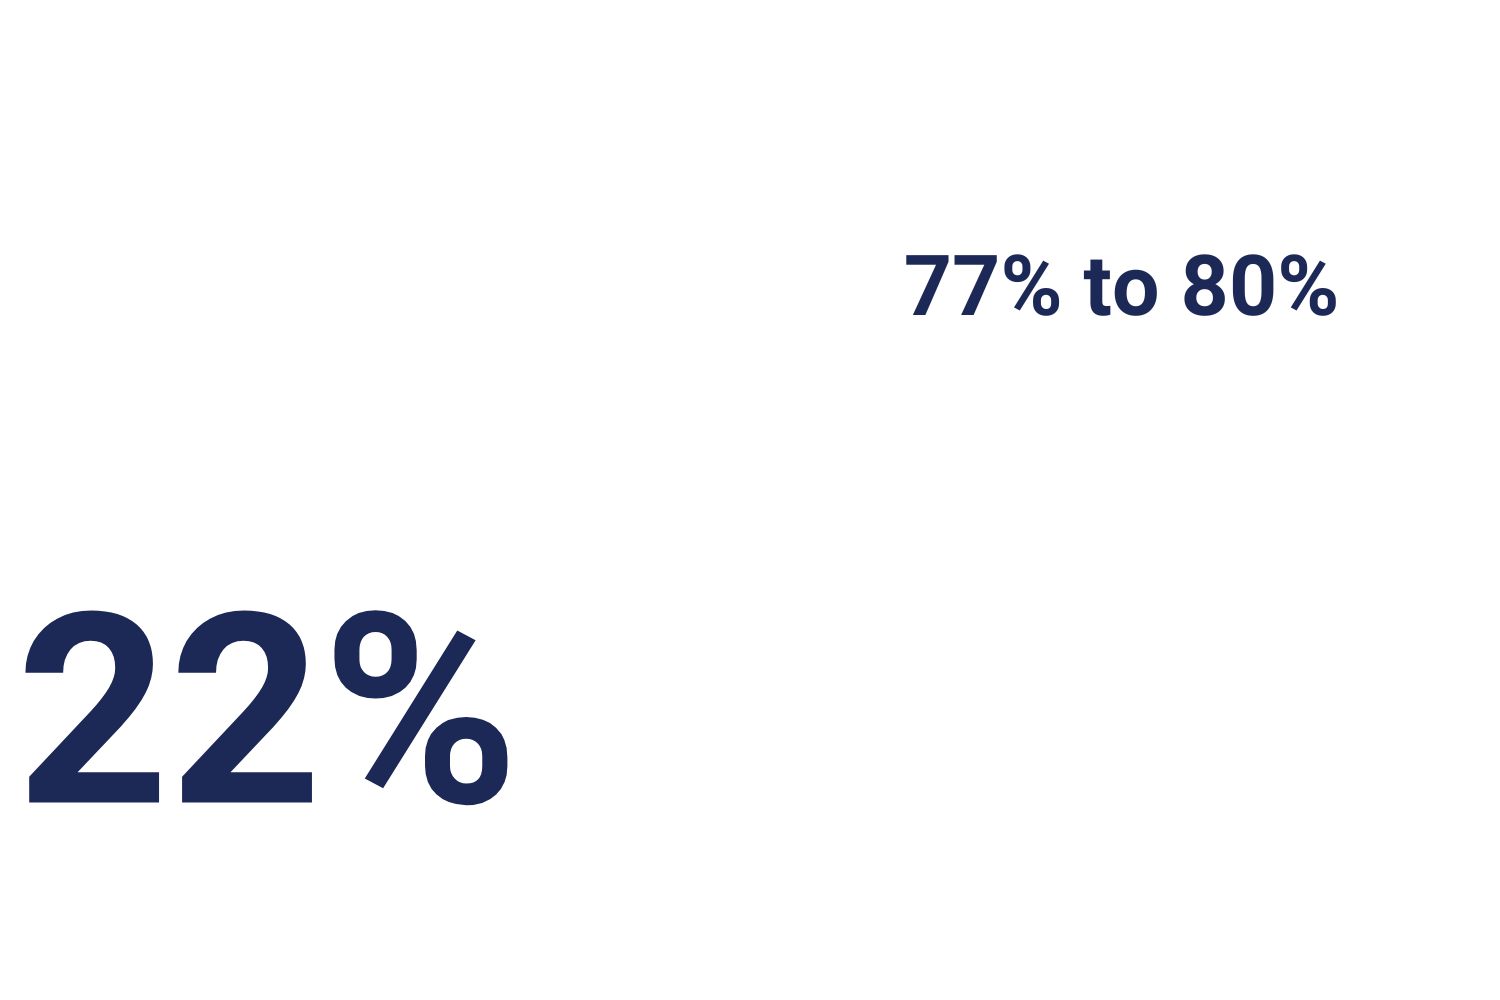 Bank fill (as a % of filled duties) has increased from 77% to 80% over the year 22% reduction on average per organisation in total monthly agency spend